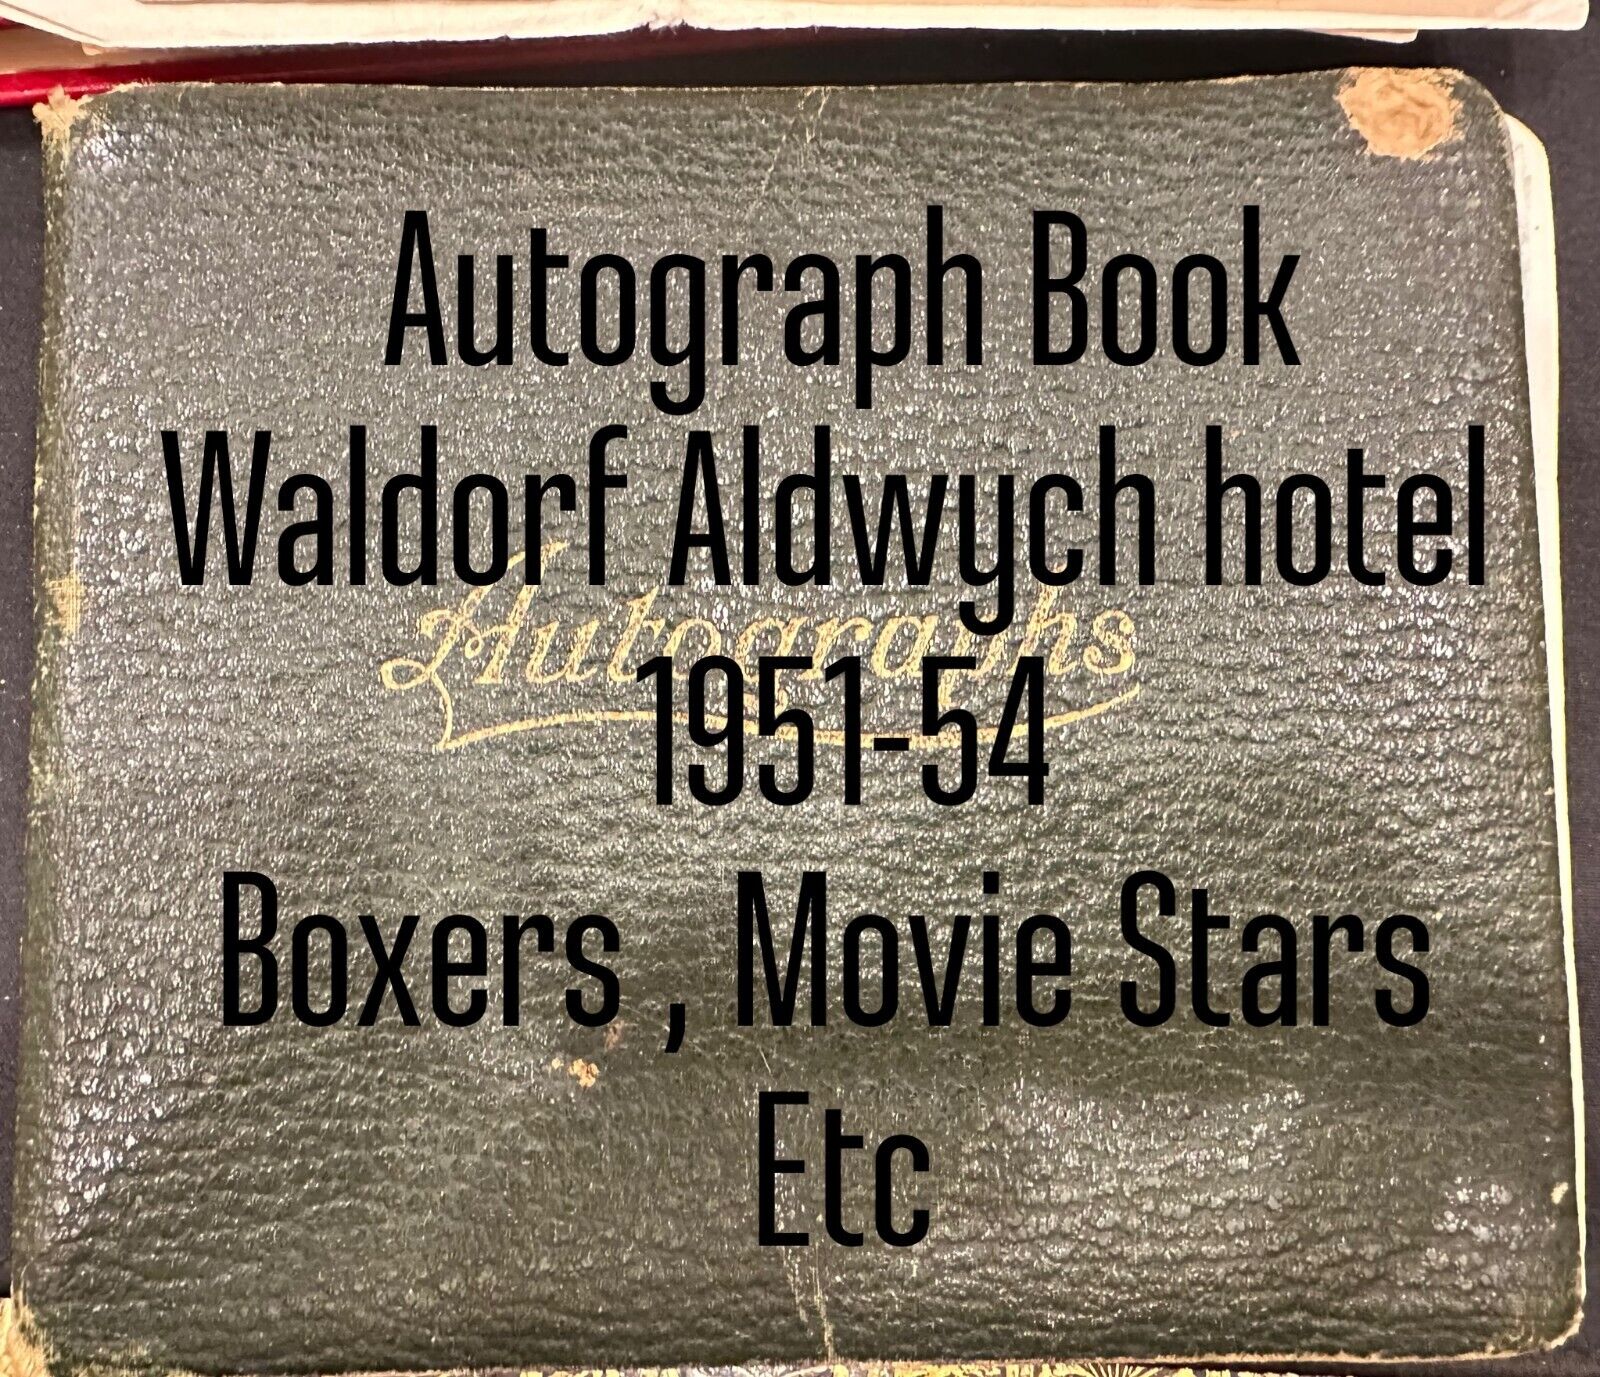 autograph Book From Waldorf Aldwych Hotel London 1951-54   see photos for list